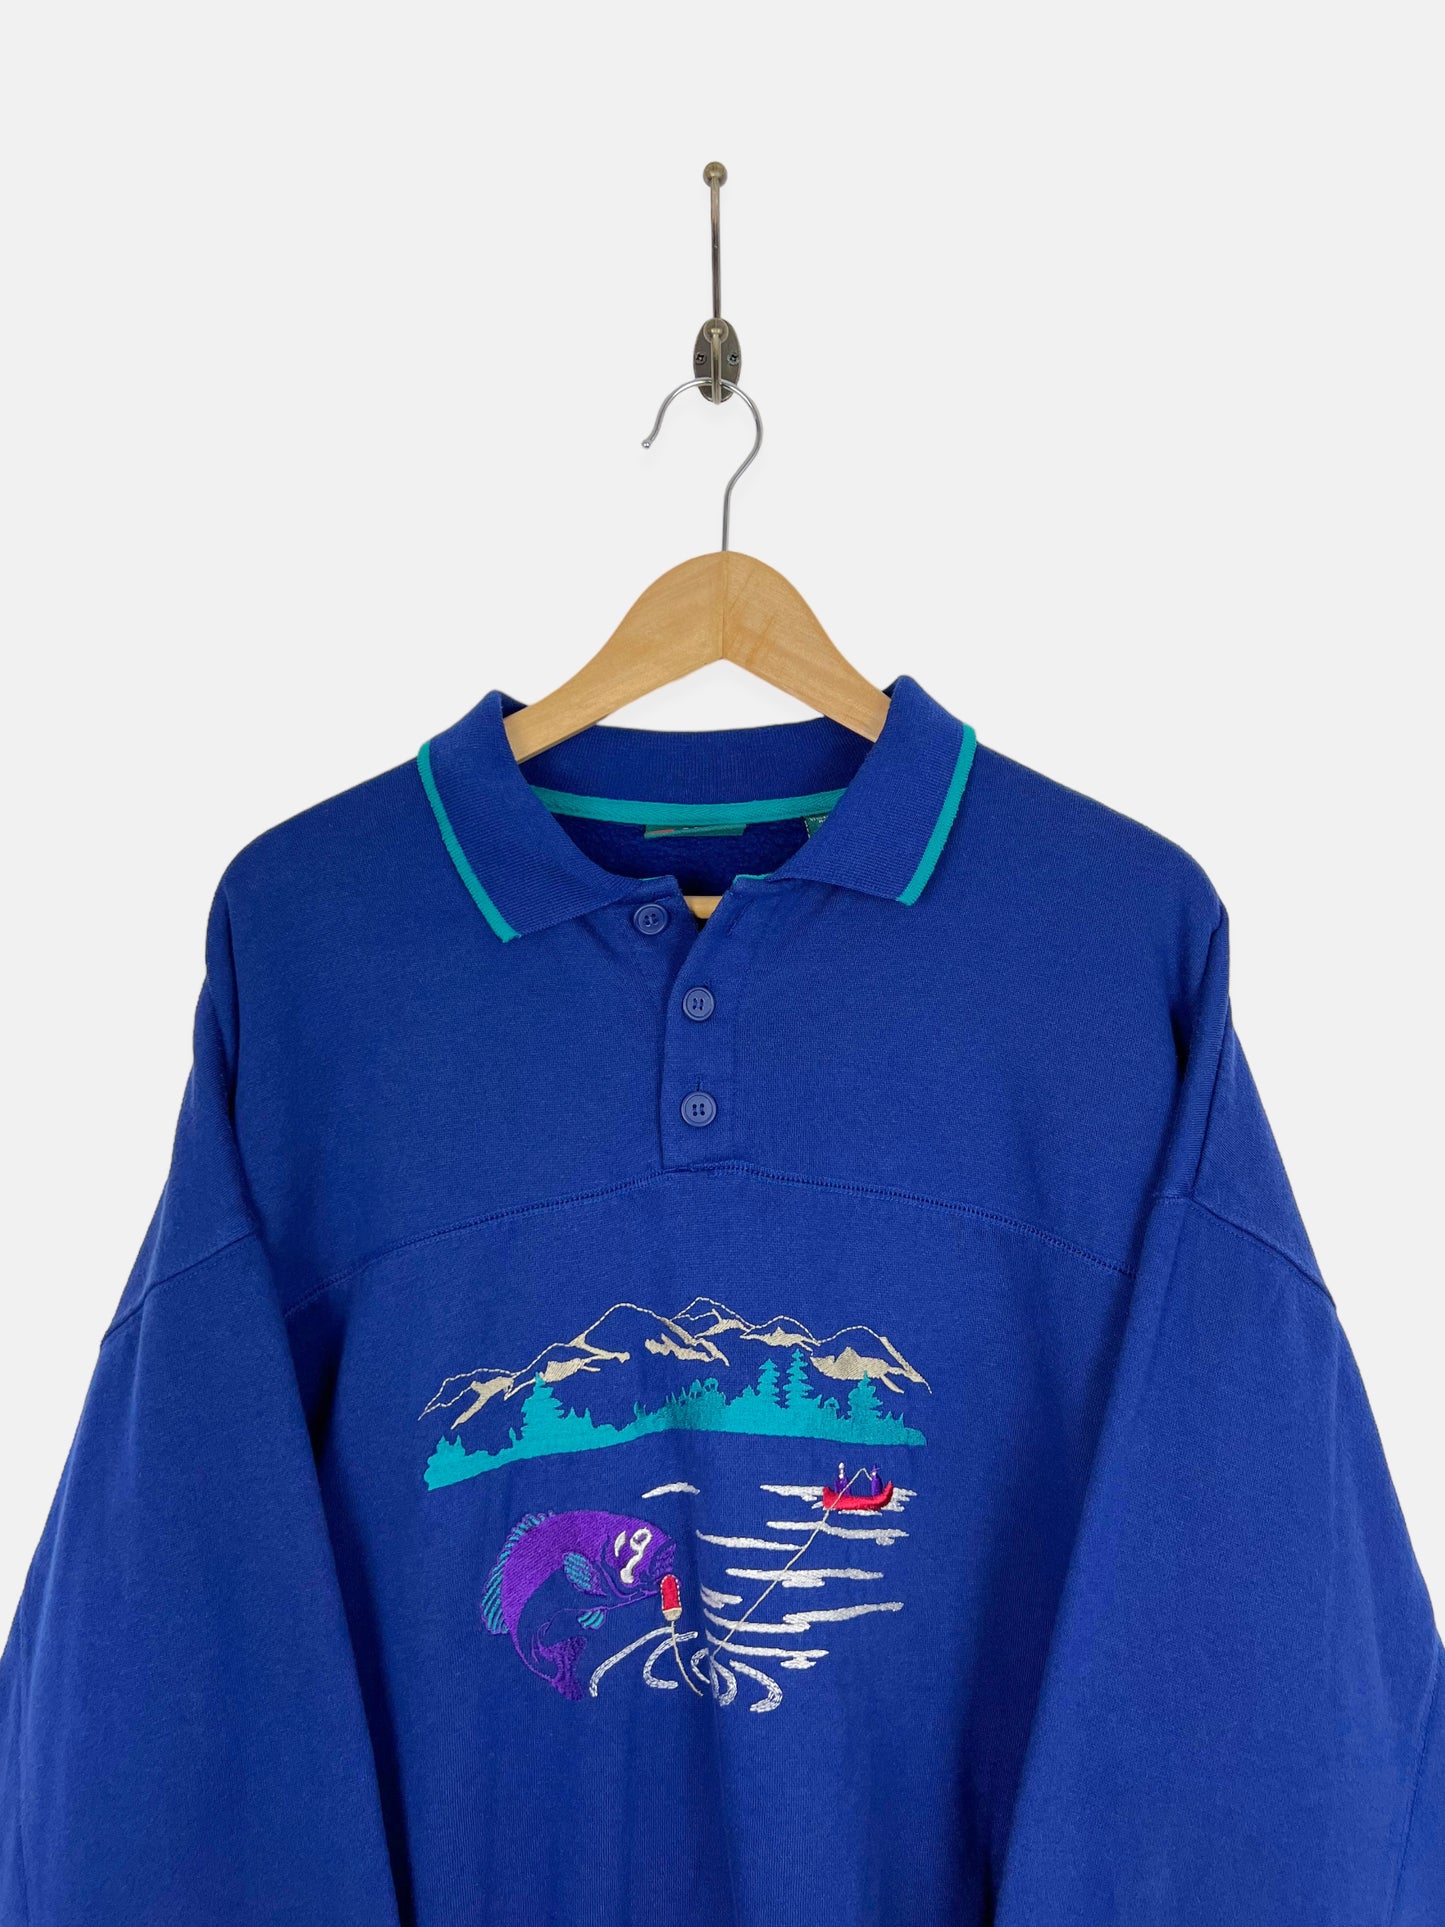 90's Fishing Embroidered Vintage Collared Sweatshirt Size L-XL